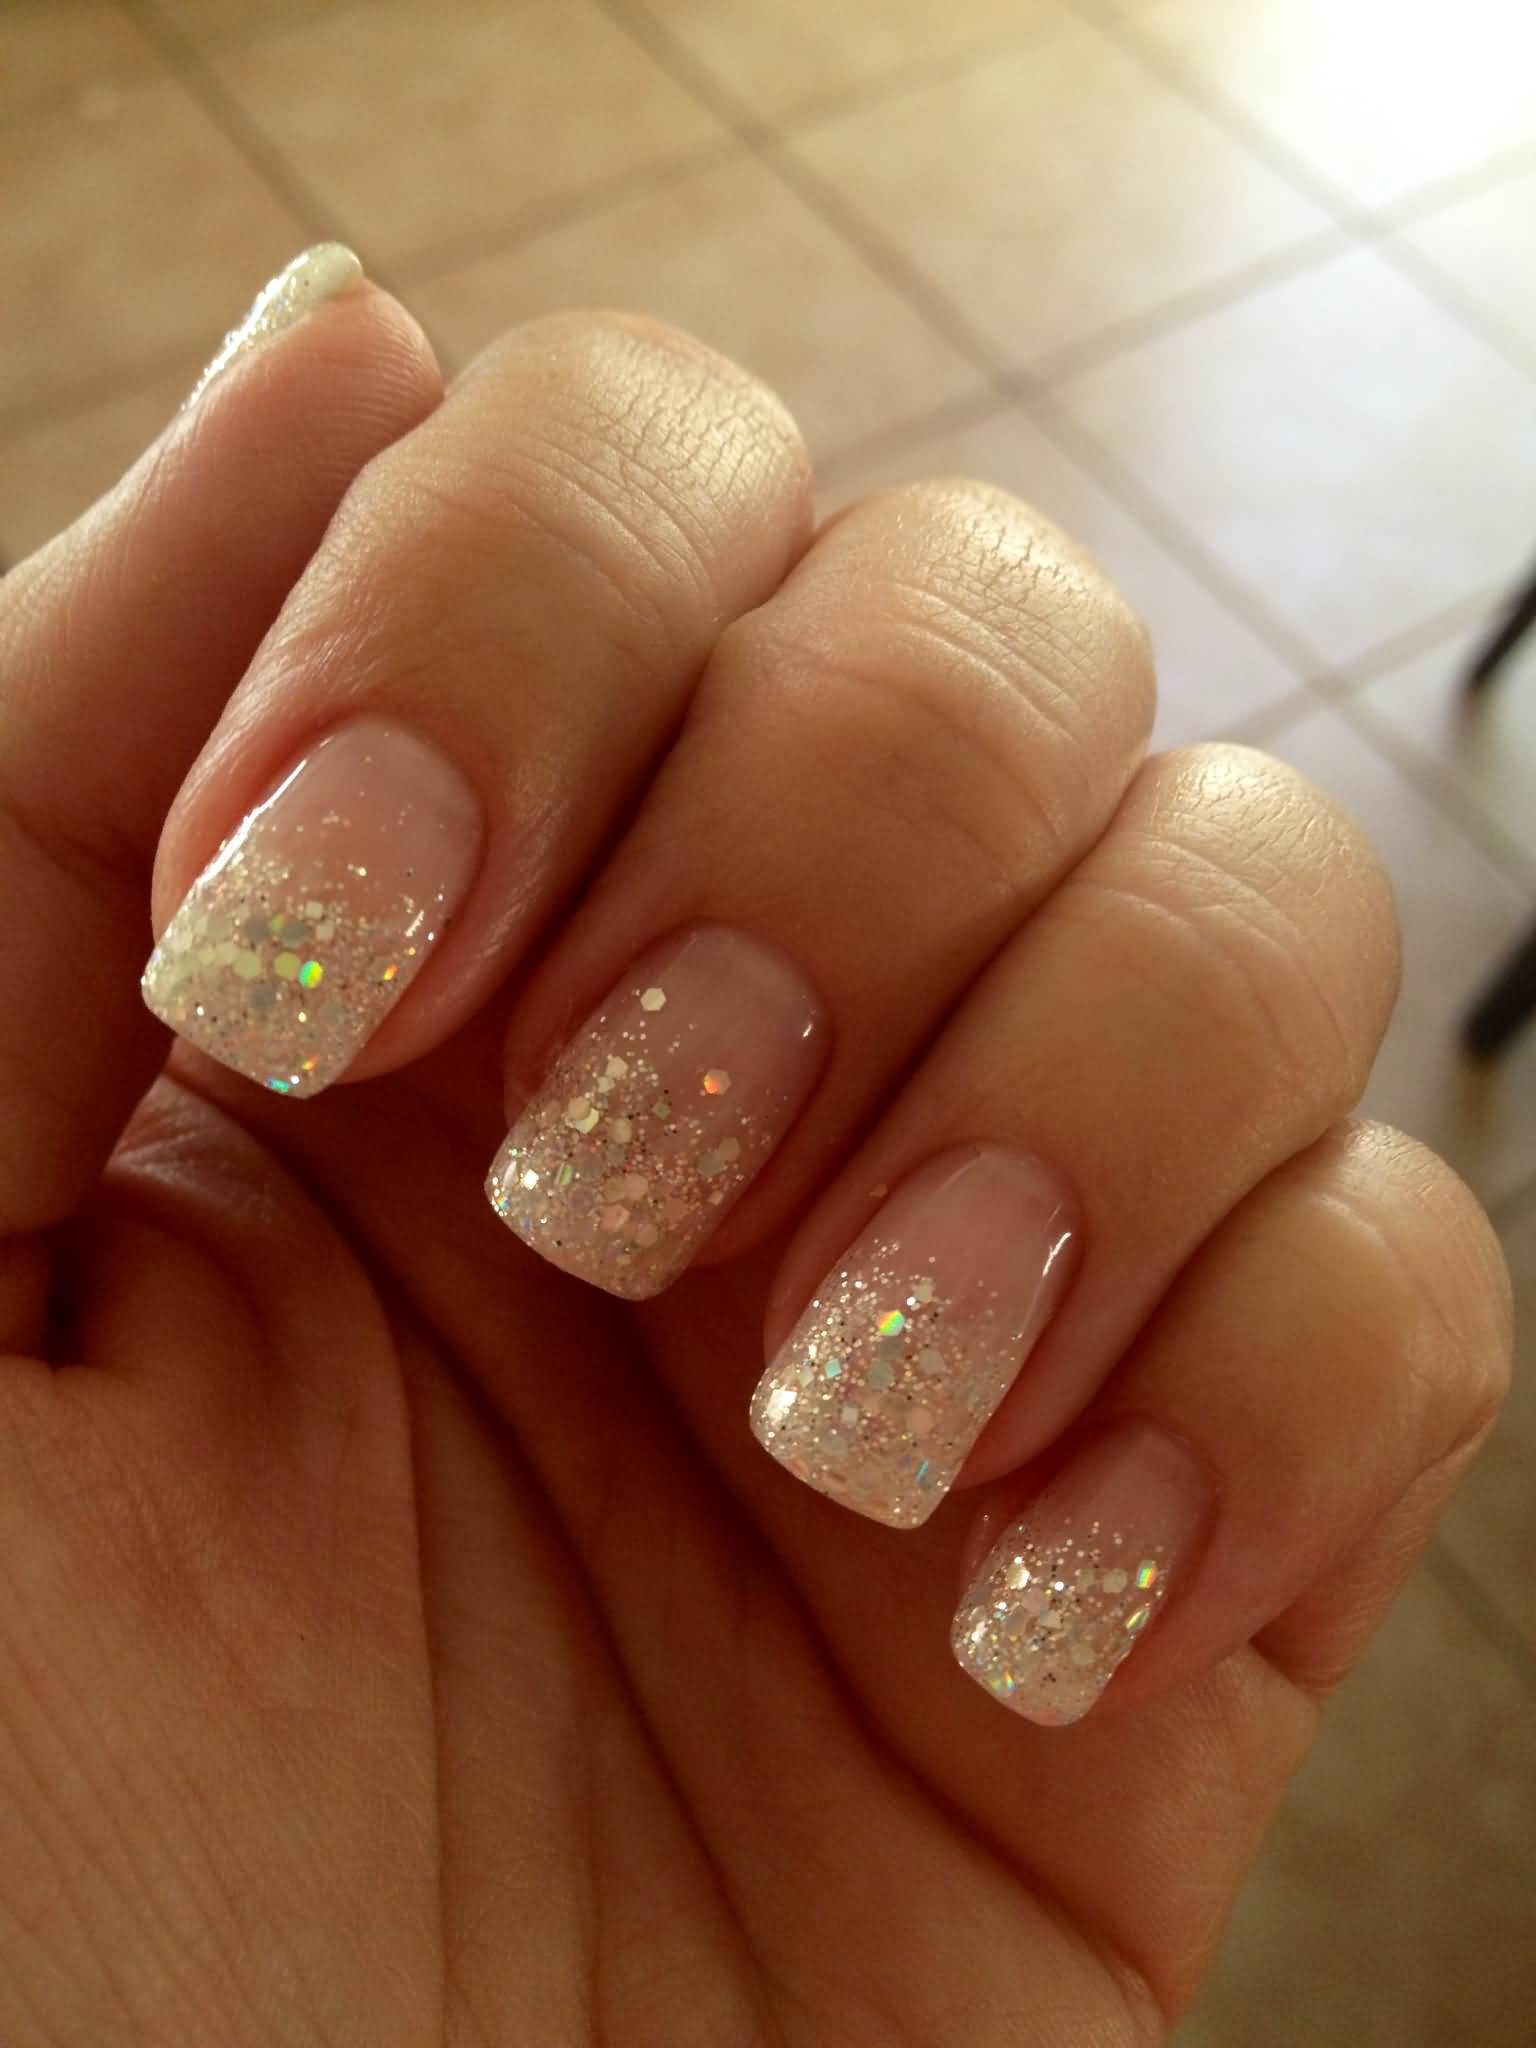 Pretty French Tip Nails
 50 Most Beautiful Glitter French Tip Nail Art Design Ideas